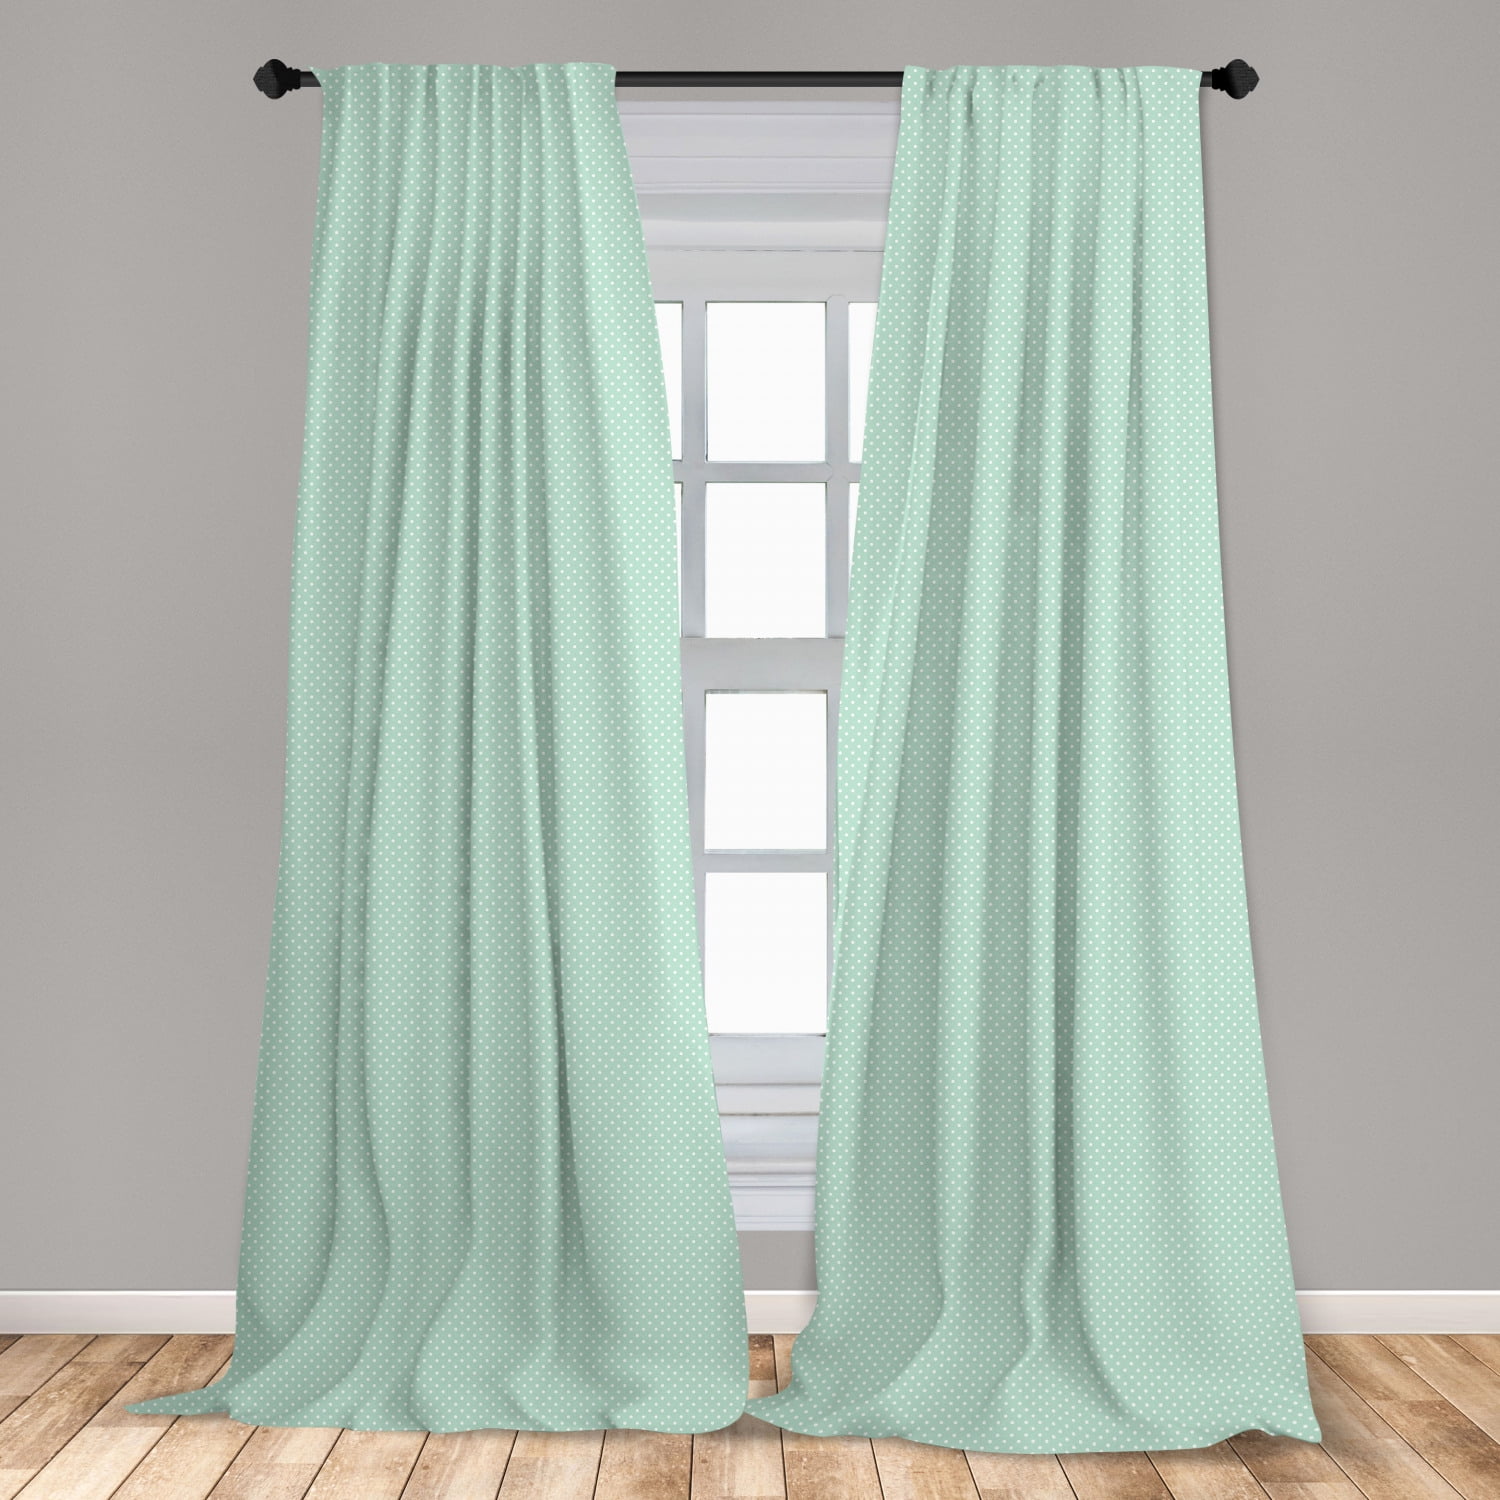 Mint Green White Retro Style Baby Nursery Themed Pattern with Little White Polka Dots Pastel 36 W x 18 L Thermal Insulated Valance for Bathroom Window valances 